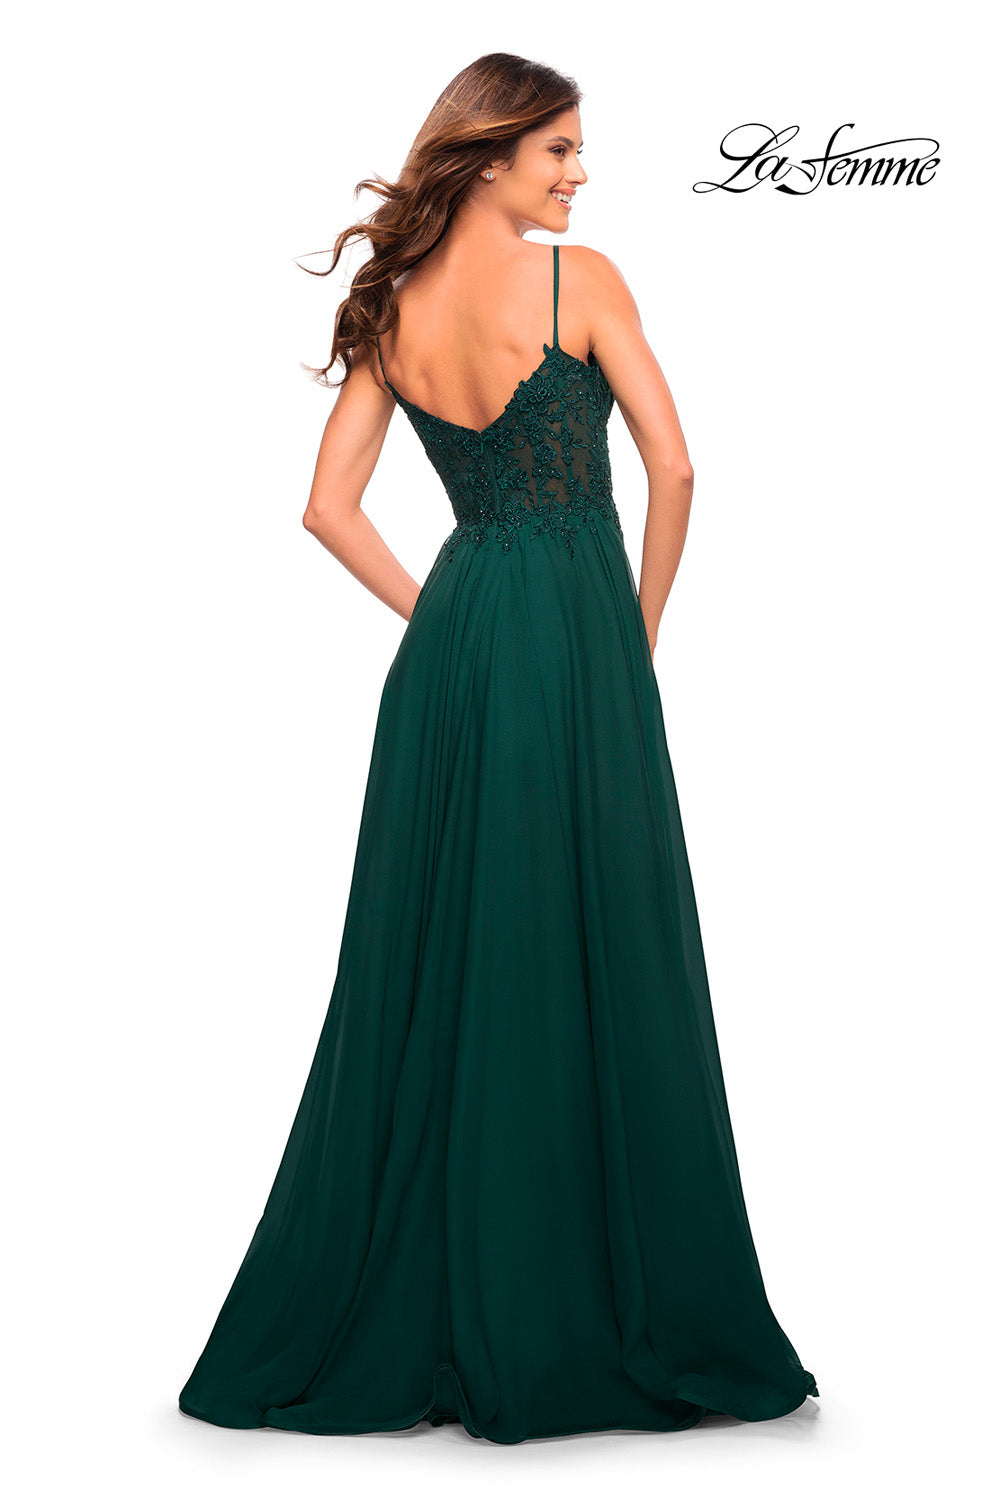 La Femme 30639 prom dress images.  La Femme 30639 is available in these colors: Black, Dark Emerald.